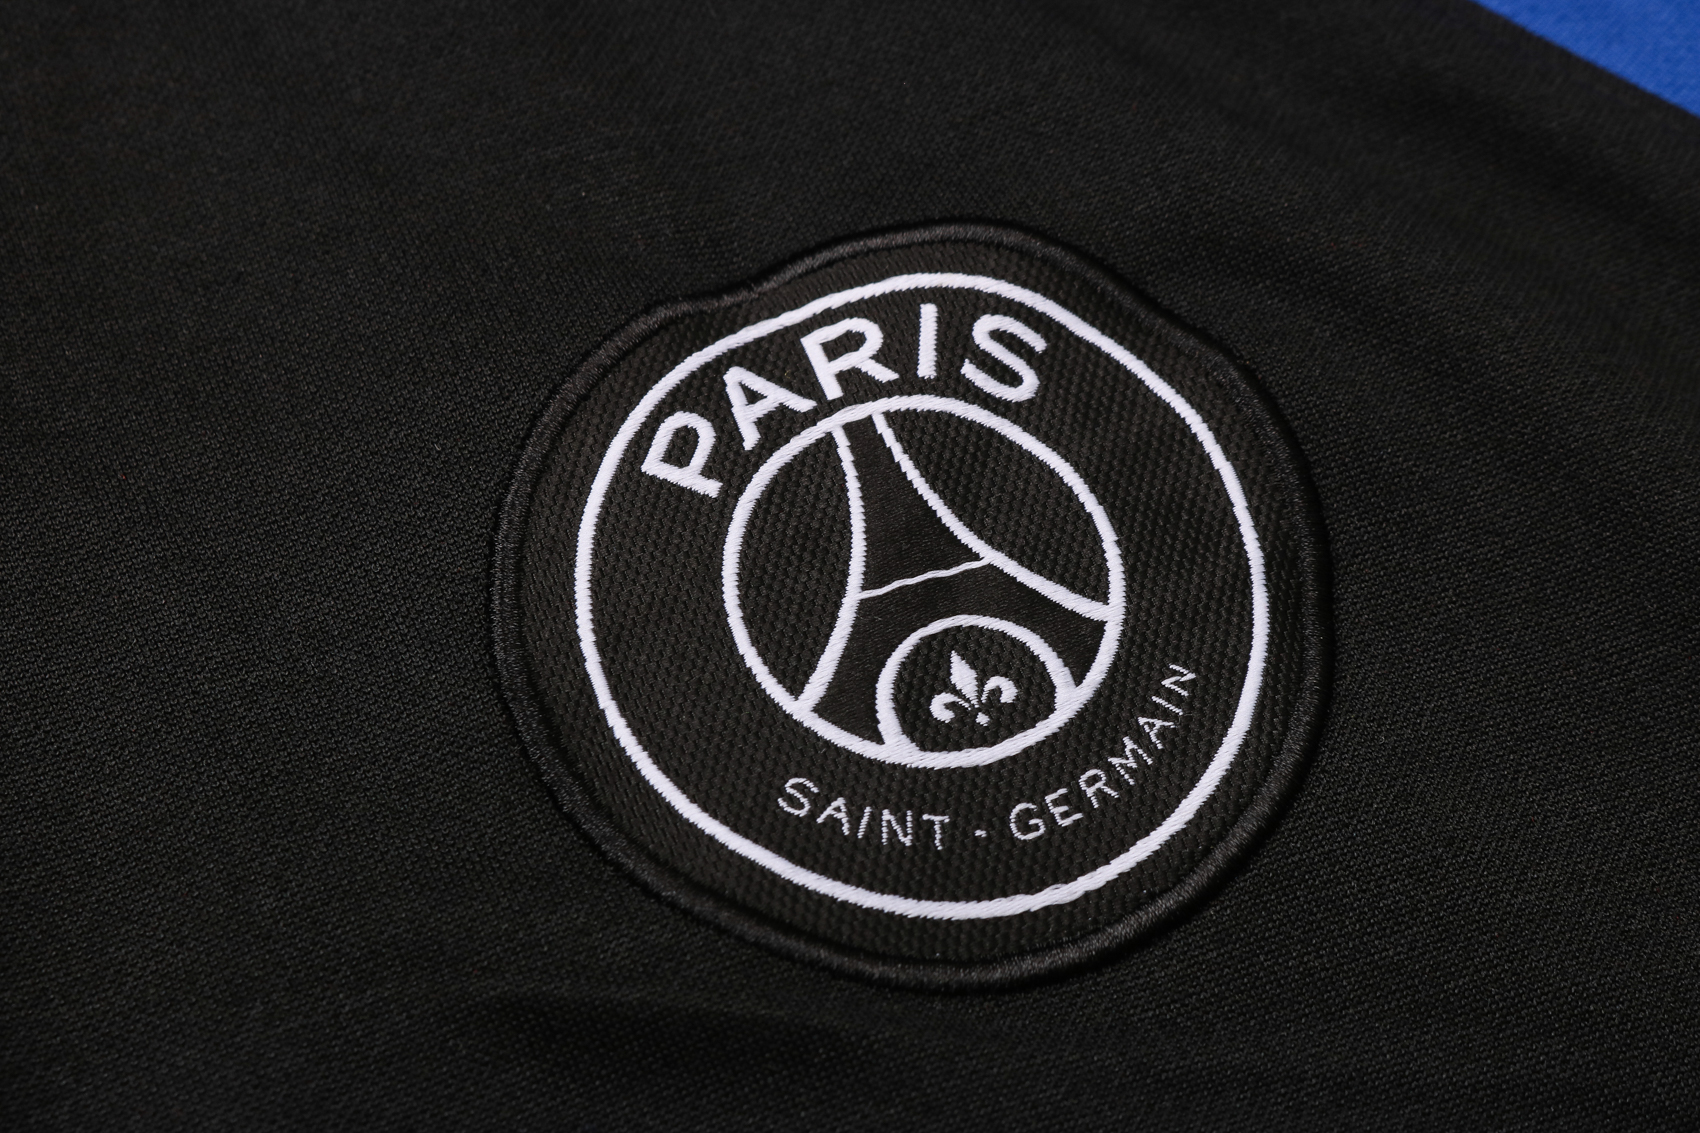 PSG Full Tracksuit With Hood - Stepiconic